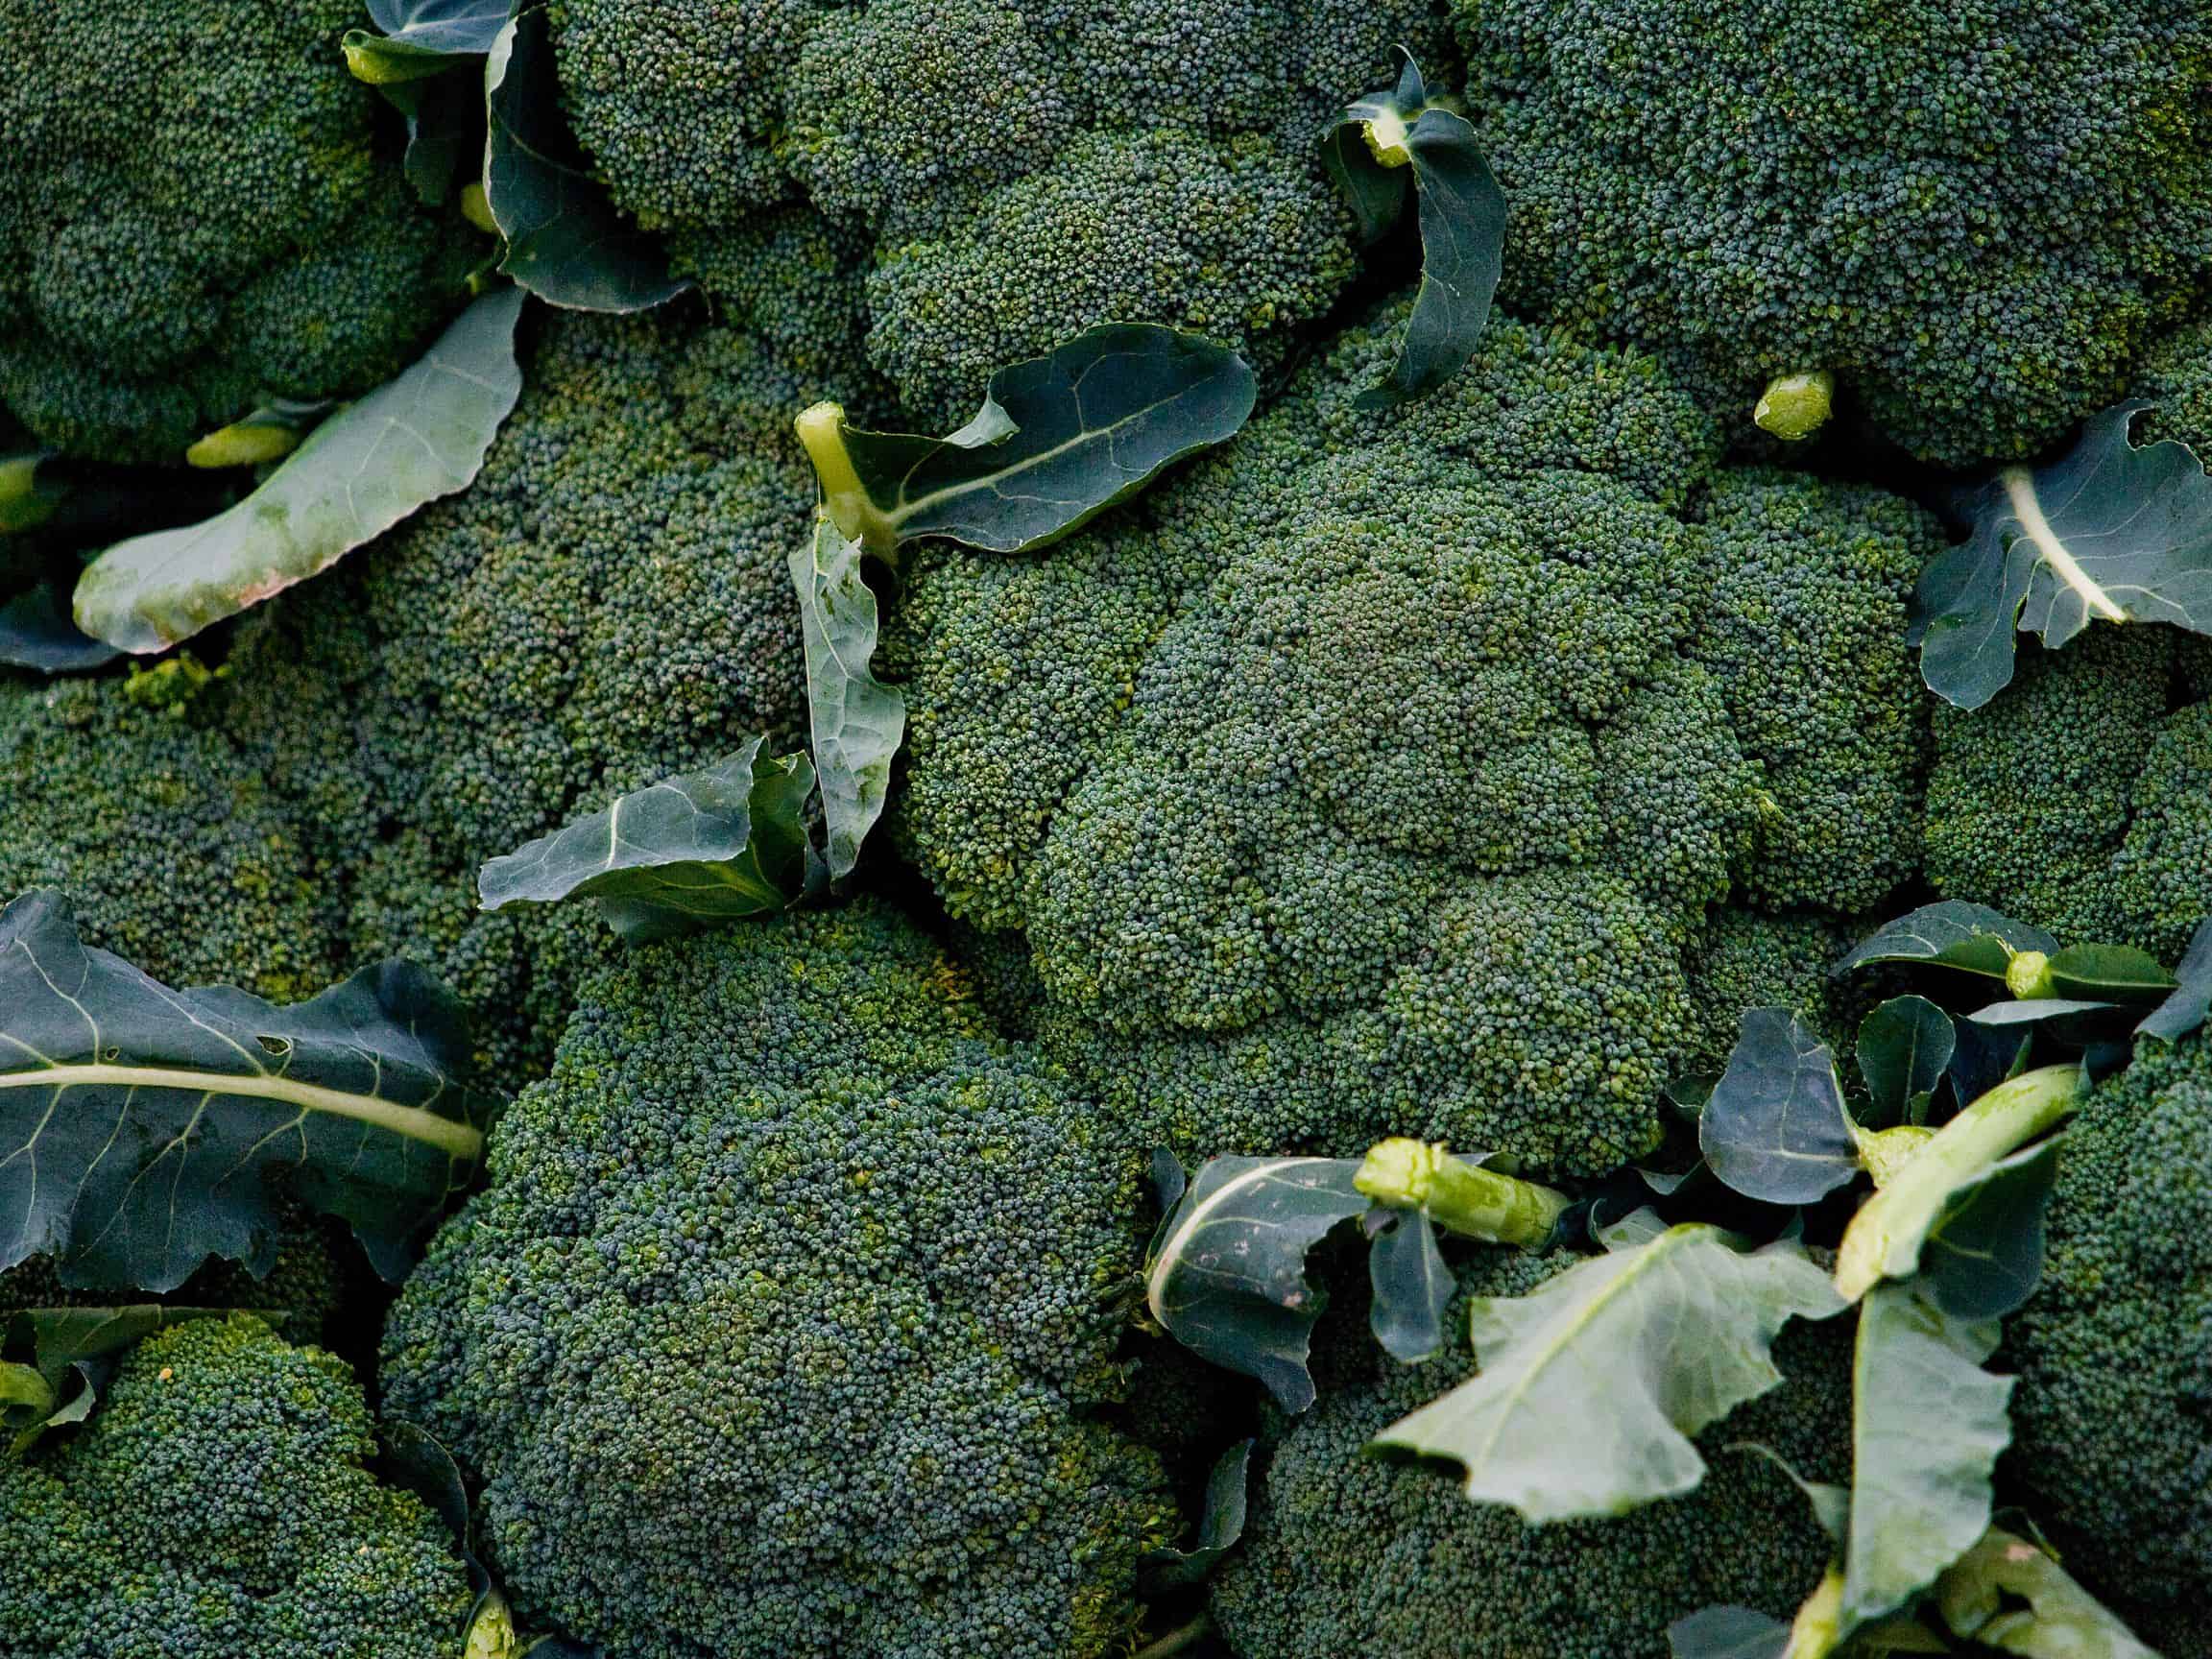 Broccoli Companion Plants – A Guide for What & What NOT to Plant